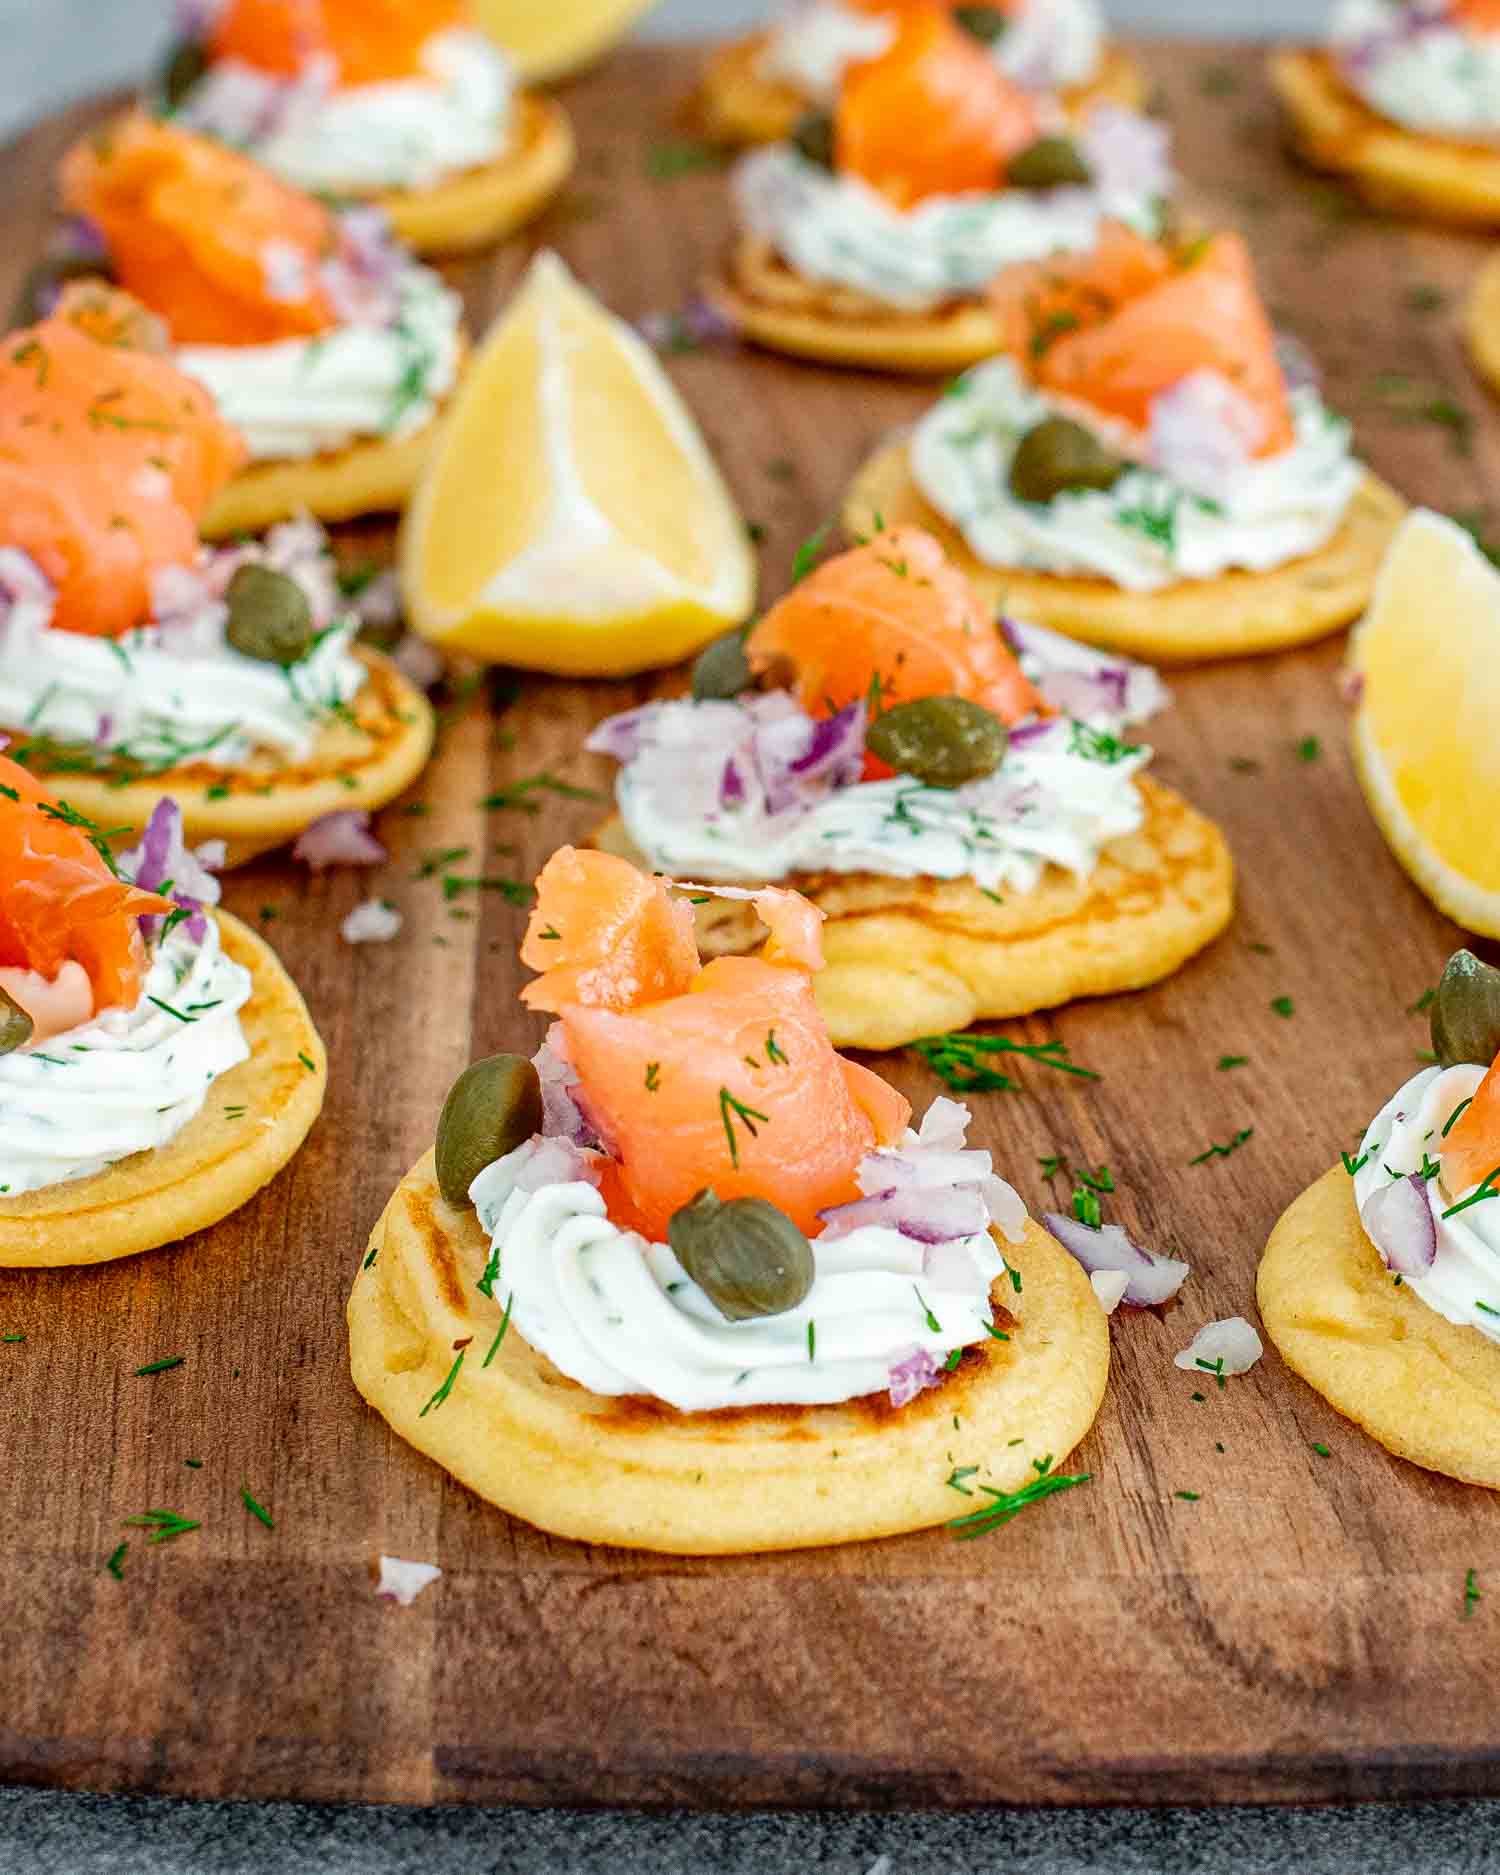 freshly made smoked salmon blinis on a cutting board garnished with lemon wedges.